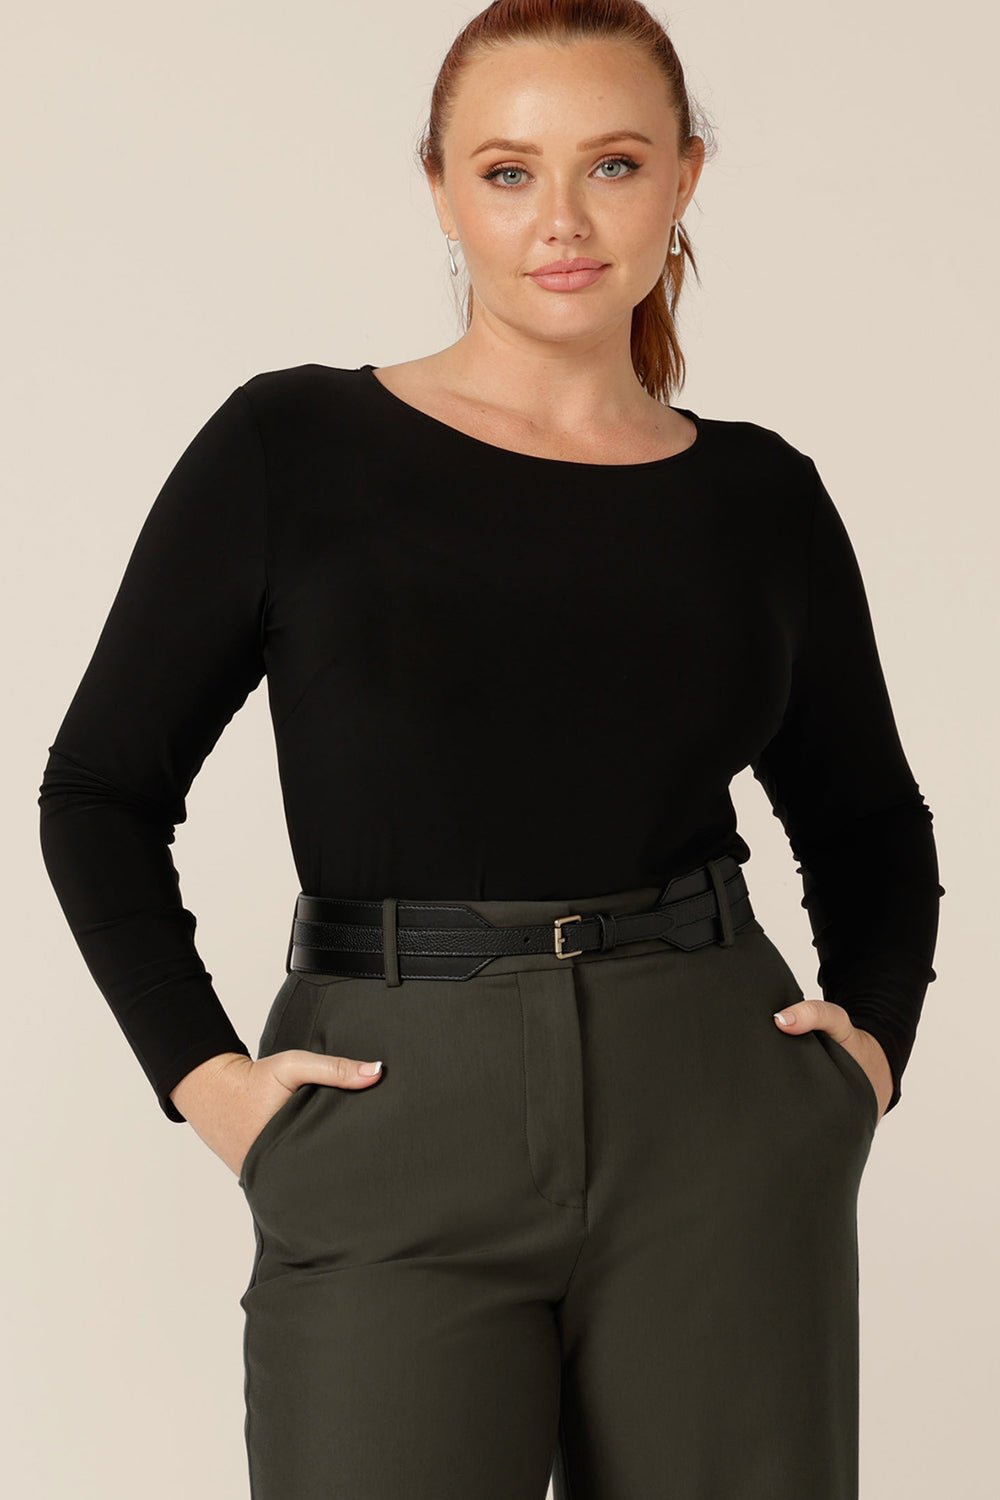 A women's, long sleeve, boat neck top in black jersey worn with tailored, olive green pants and a black belt. Made in Australia by Australian and New Zealand women's clothing brand, L&F, this is an easy workwear top for women in petite to plus sizes.